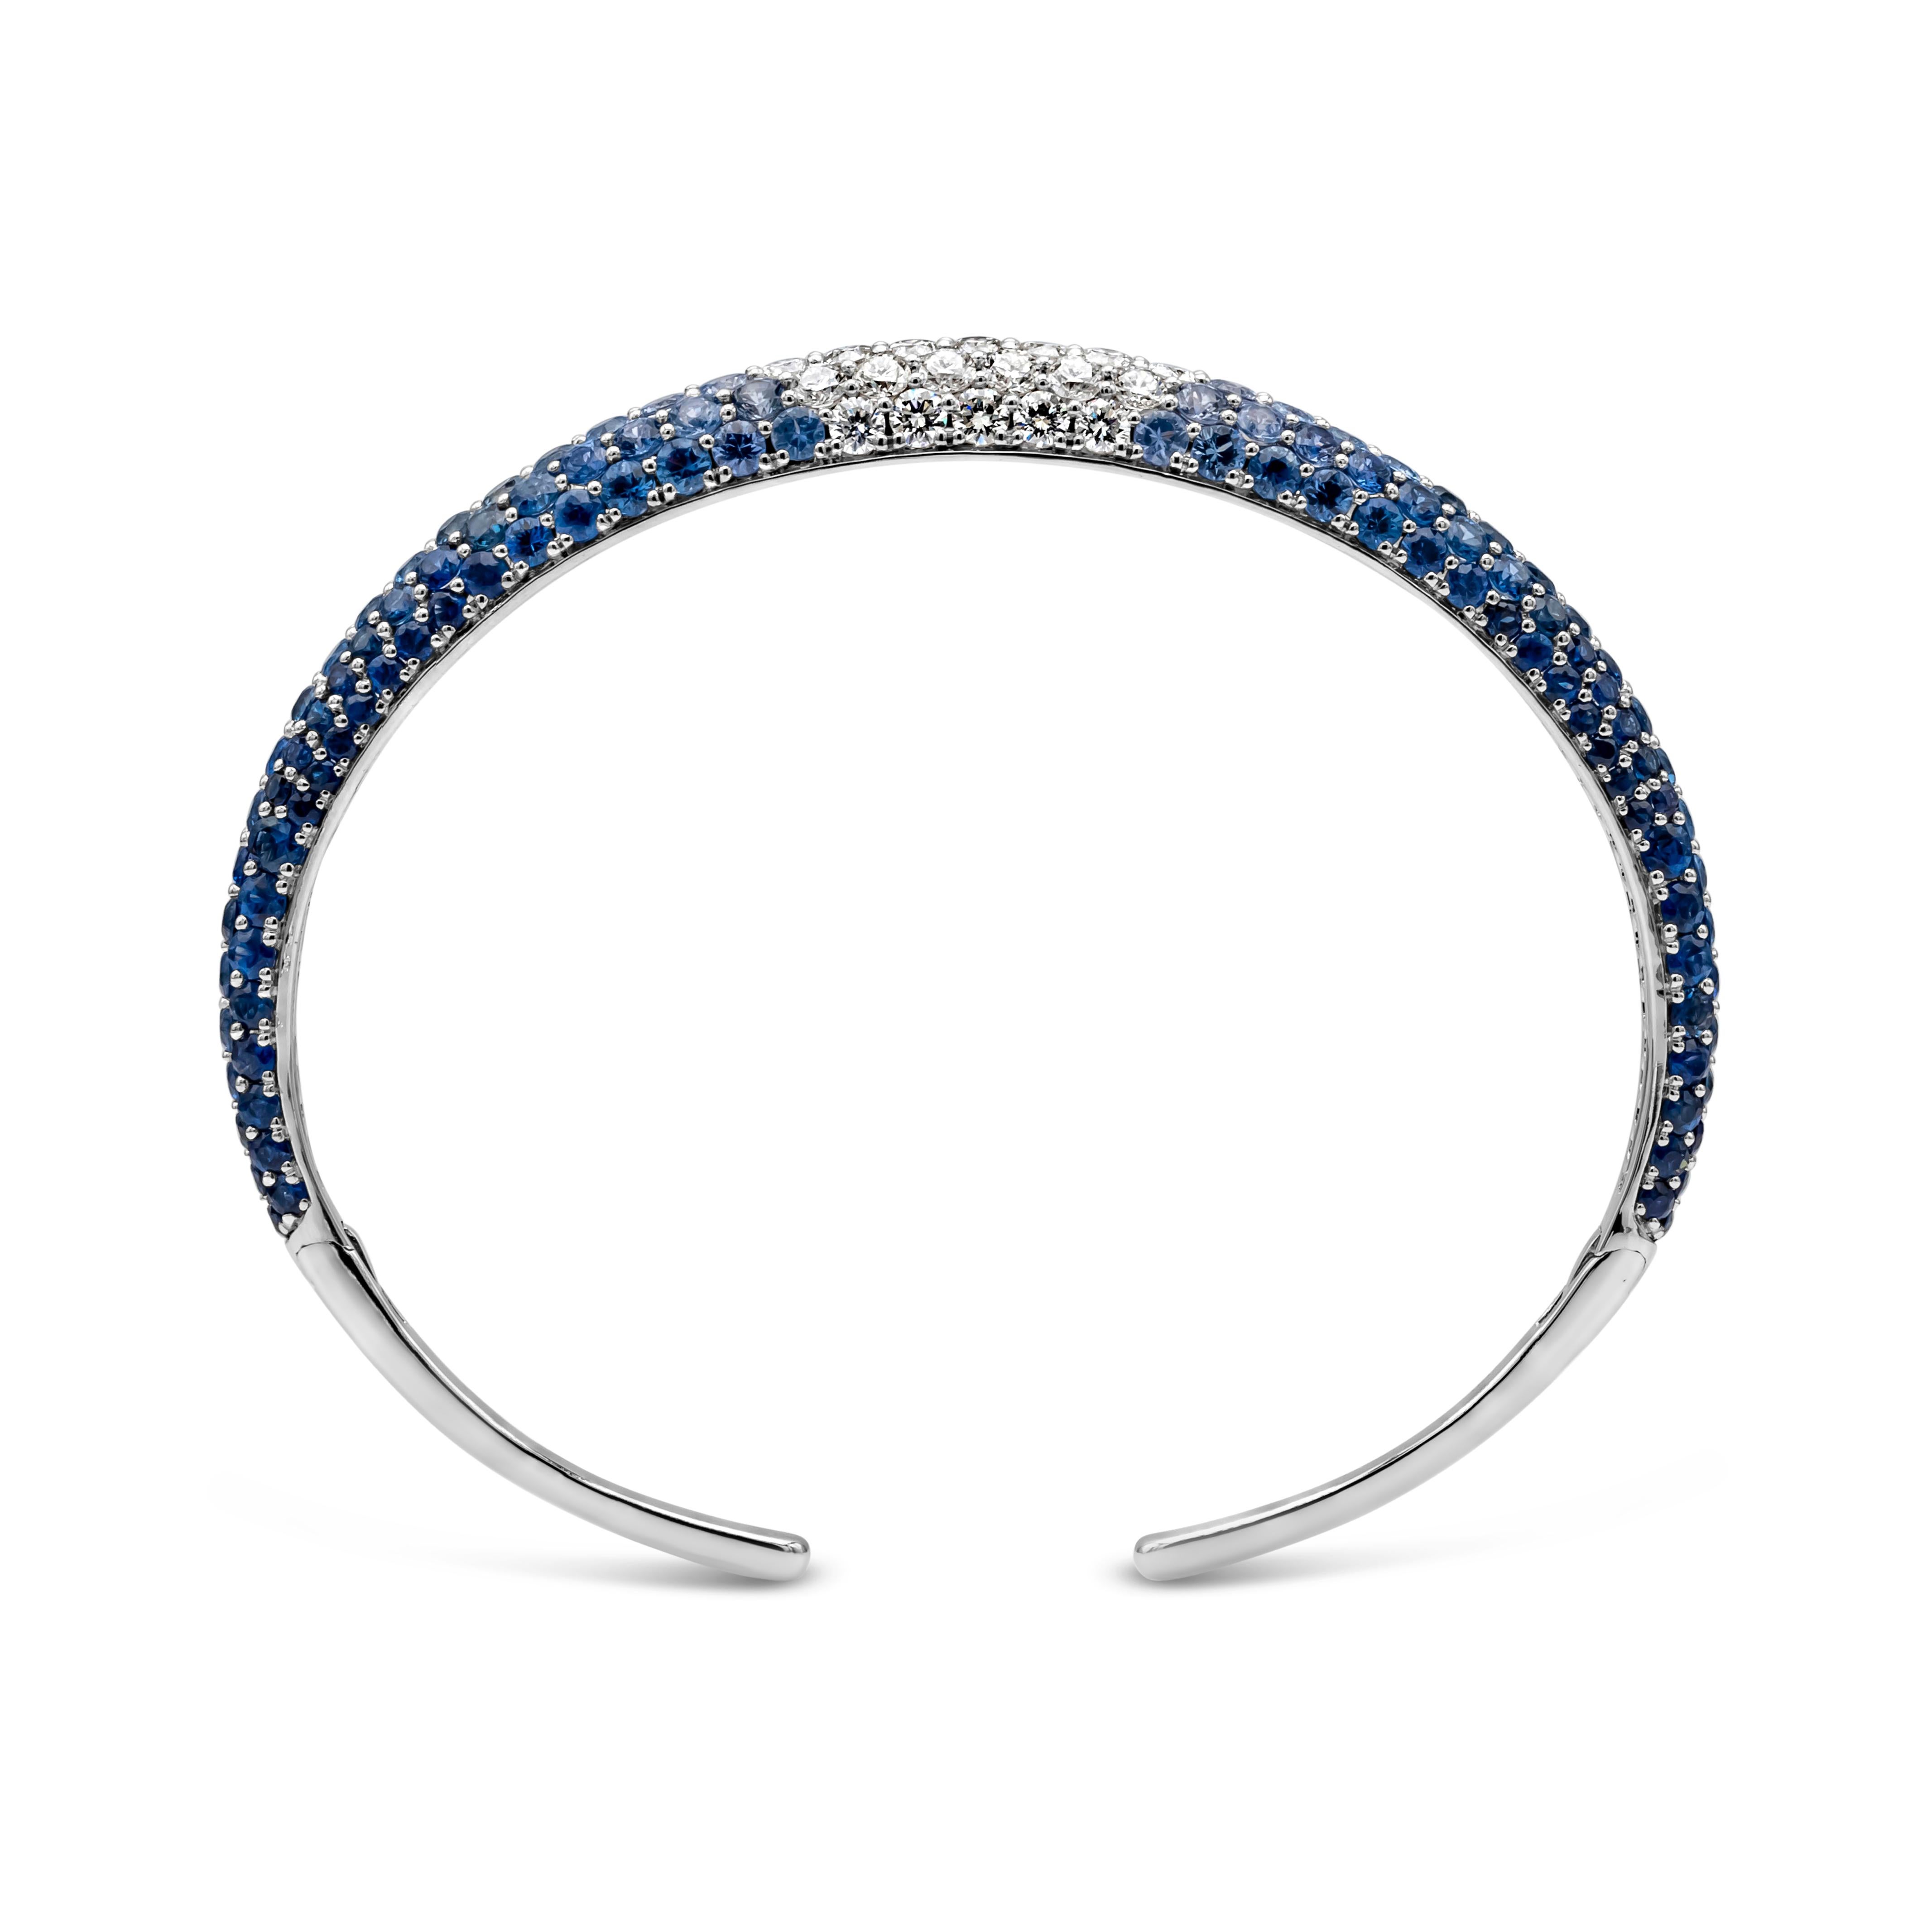 Roman Malakov 10.05 Carats Total Round Cut Sapphire And Diamond Bangle Bracelet In New Condition For Sale In New York, NY